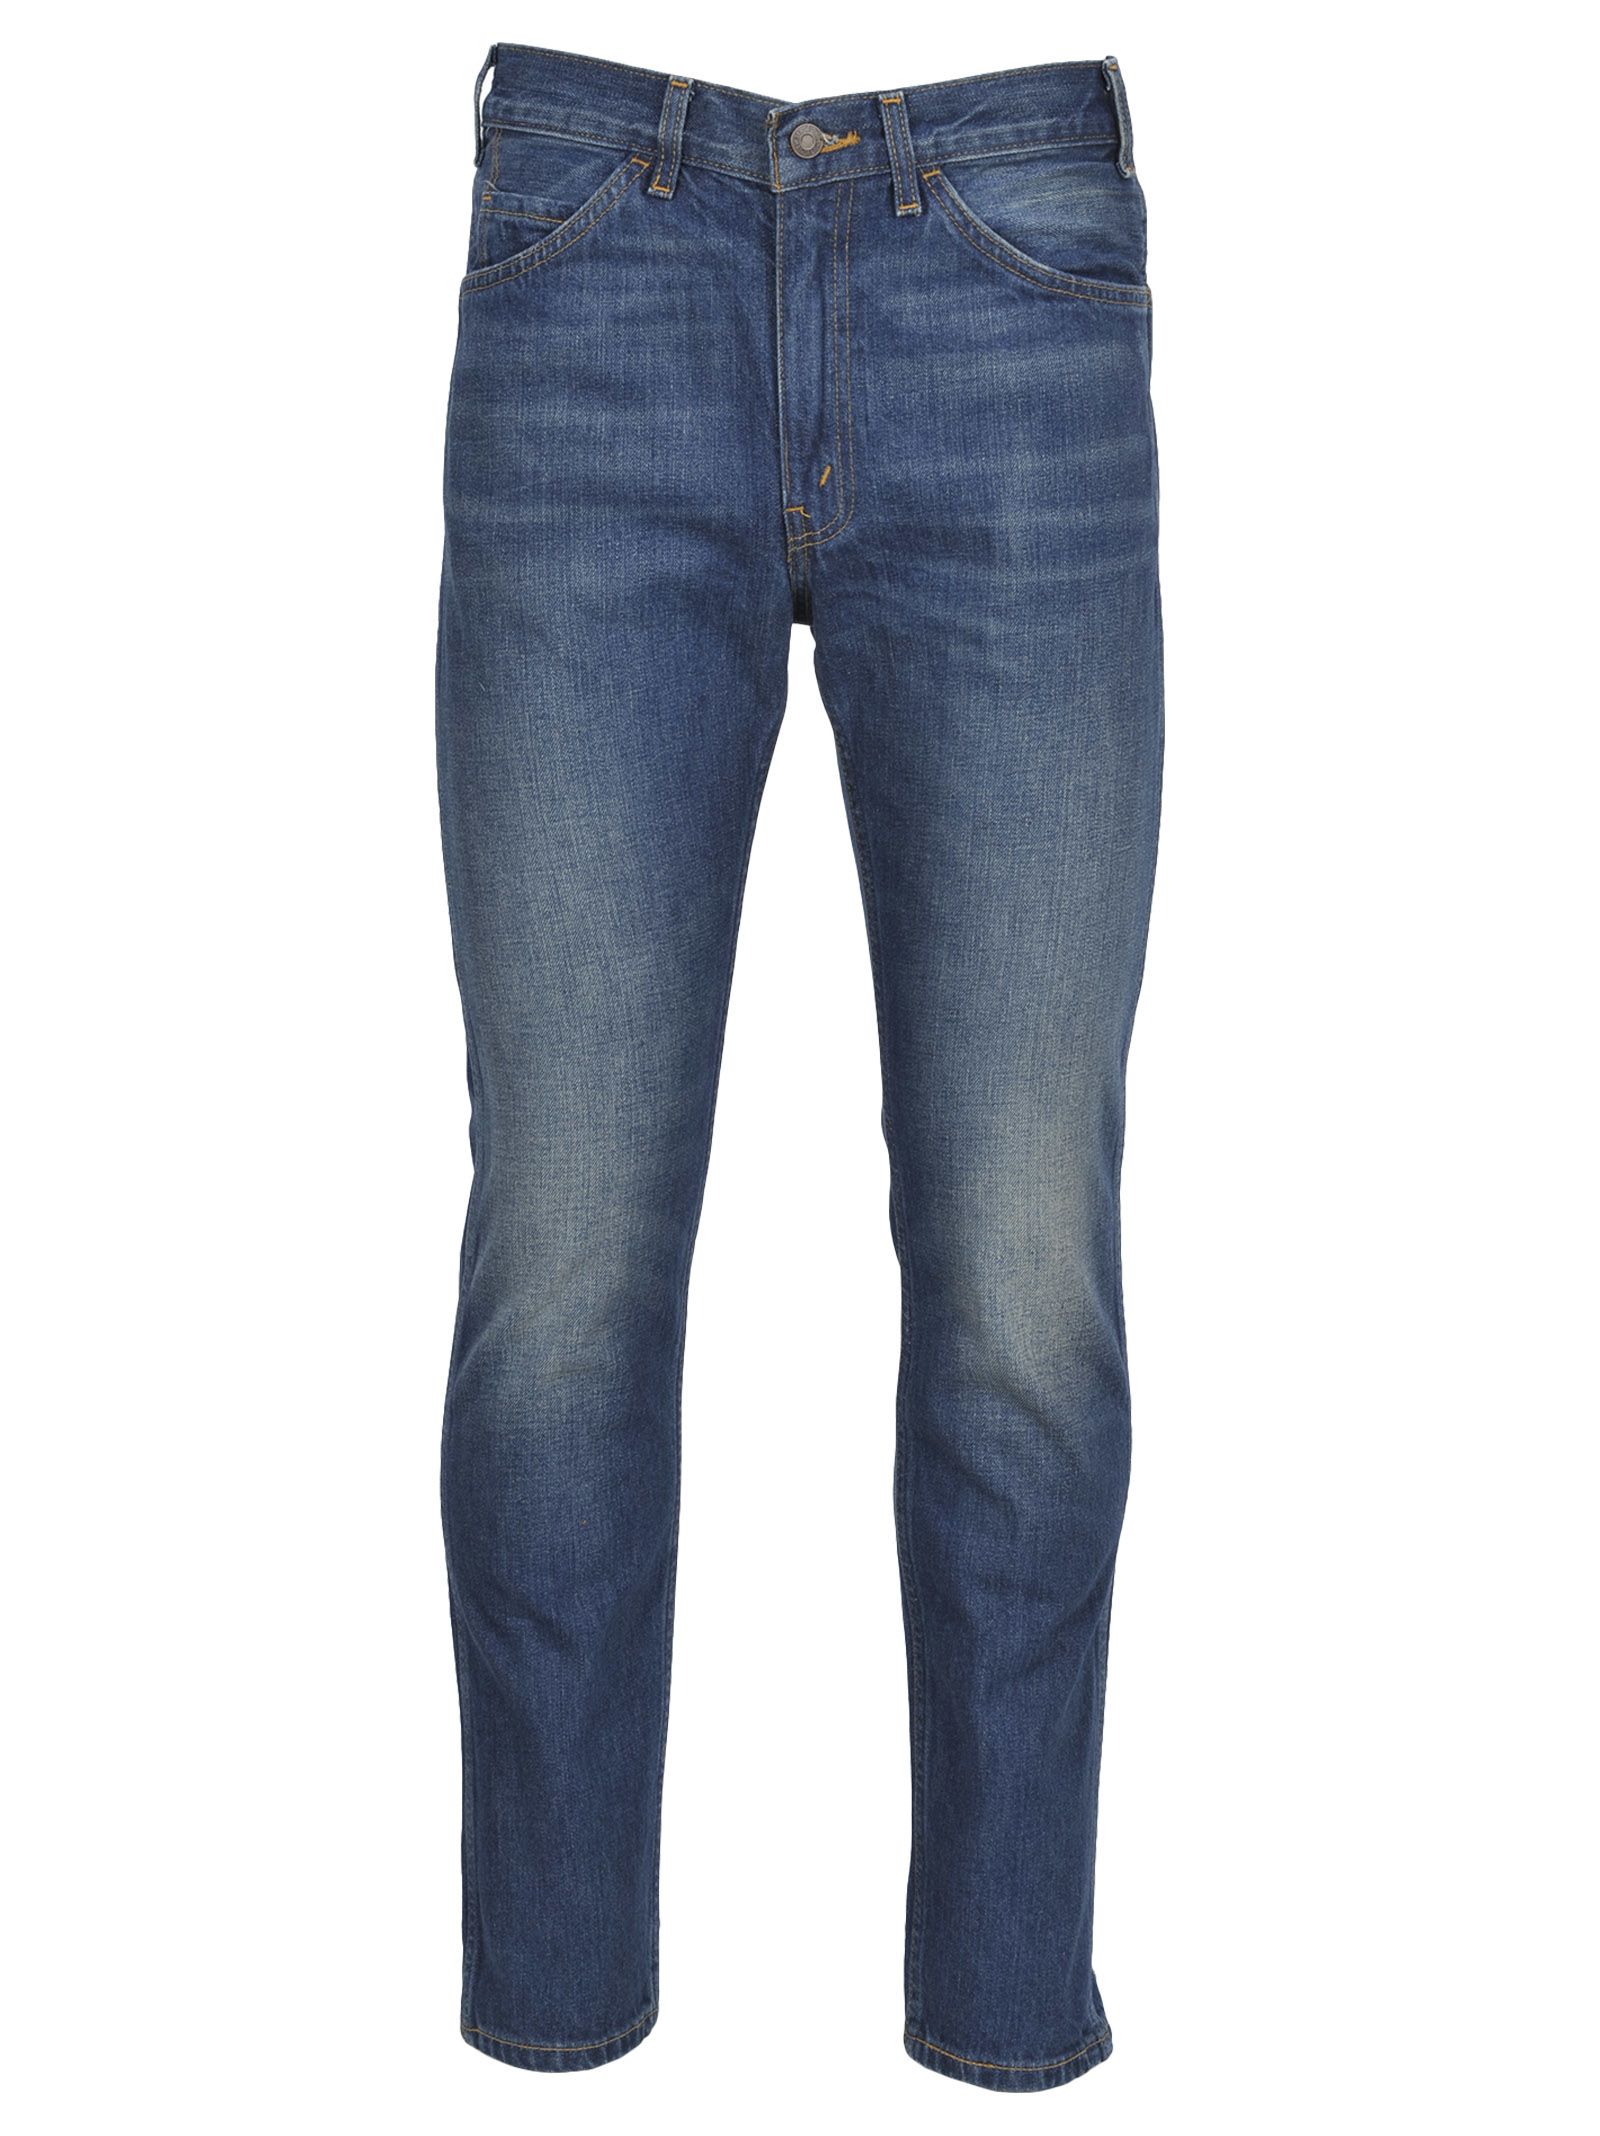 italist | Best price in the market for Levi's Vintage Clothing Levis ...